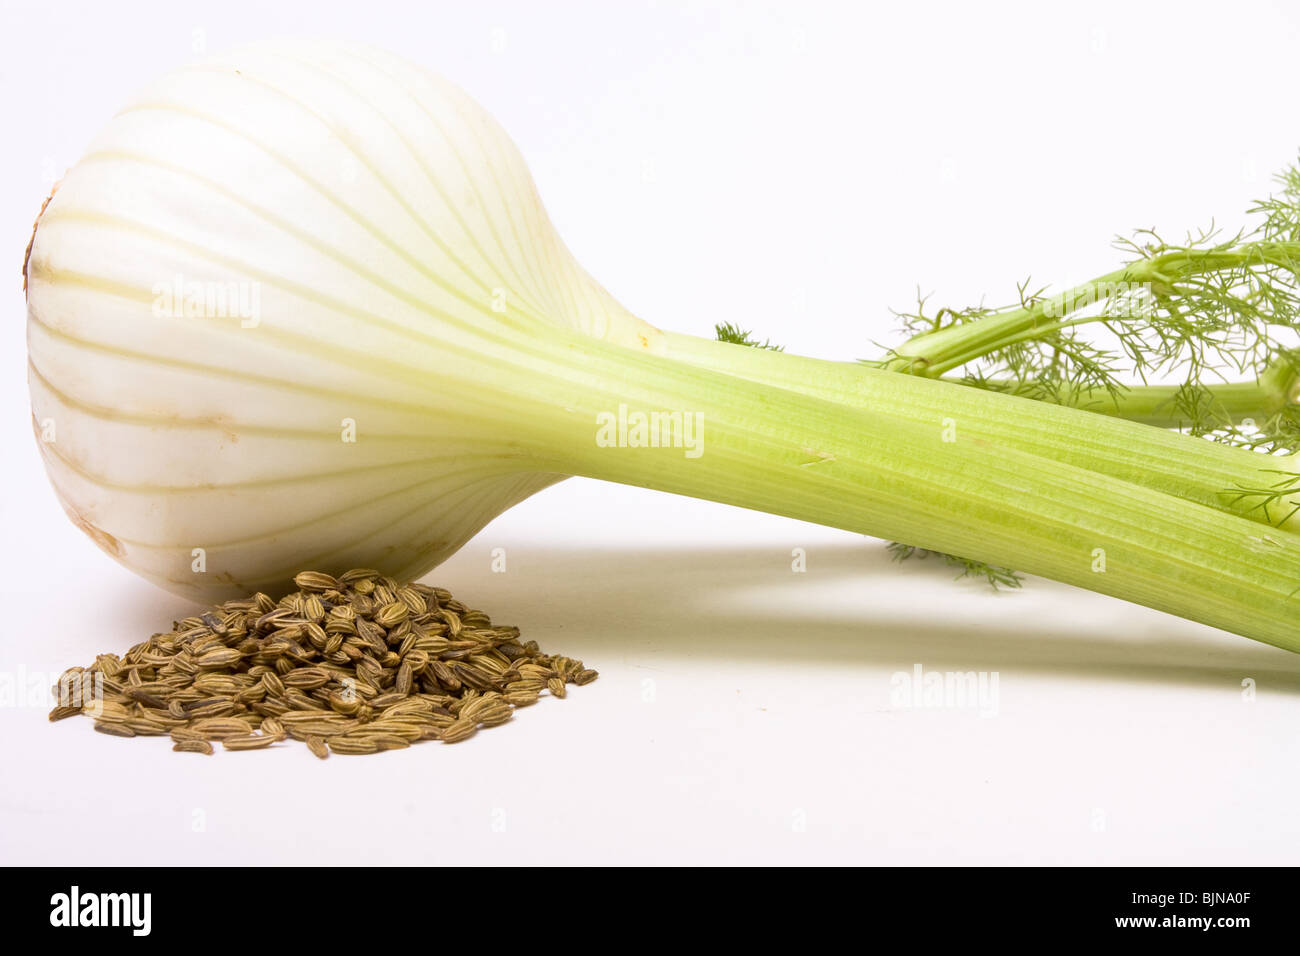 Close up of Single Fennel bulb and Fennel seeds against white background. Stock Photo